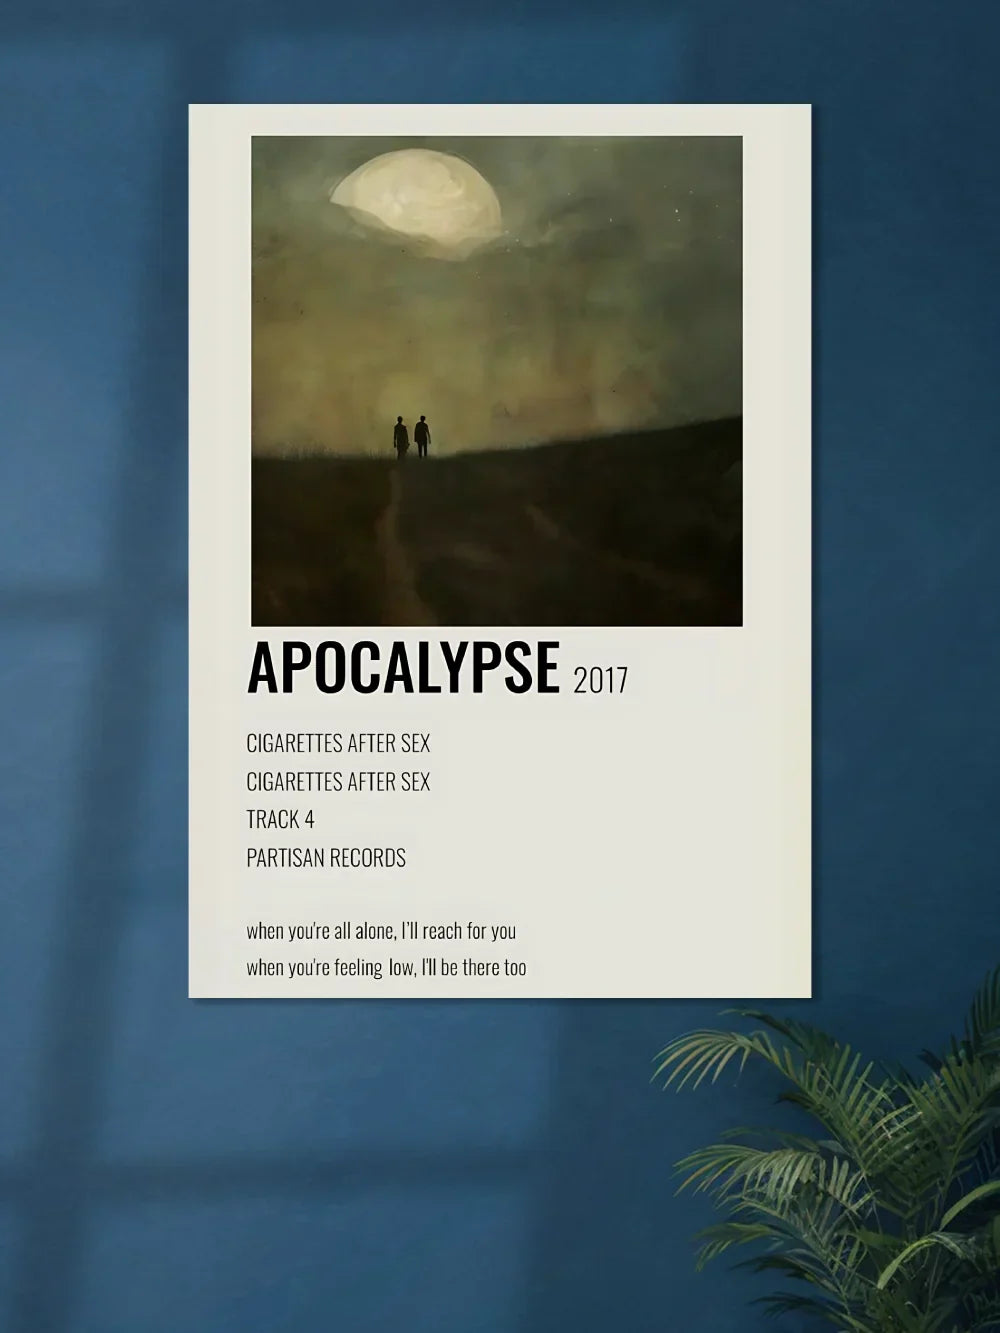 Ft. Cigarettes After Sex x Apocalypse 2017 | Music Poster